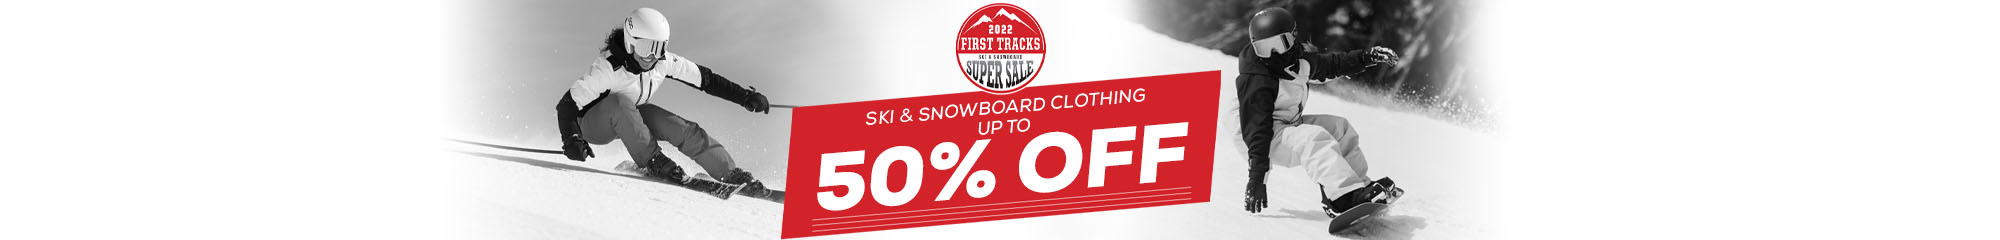 First Tracks Sale up to 50% Off